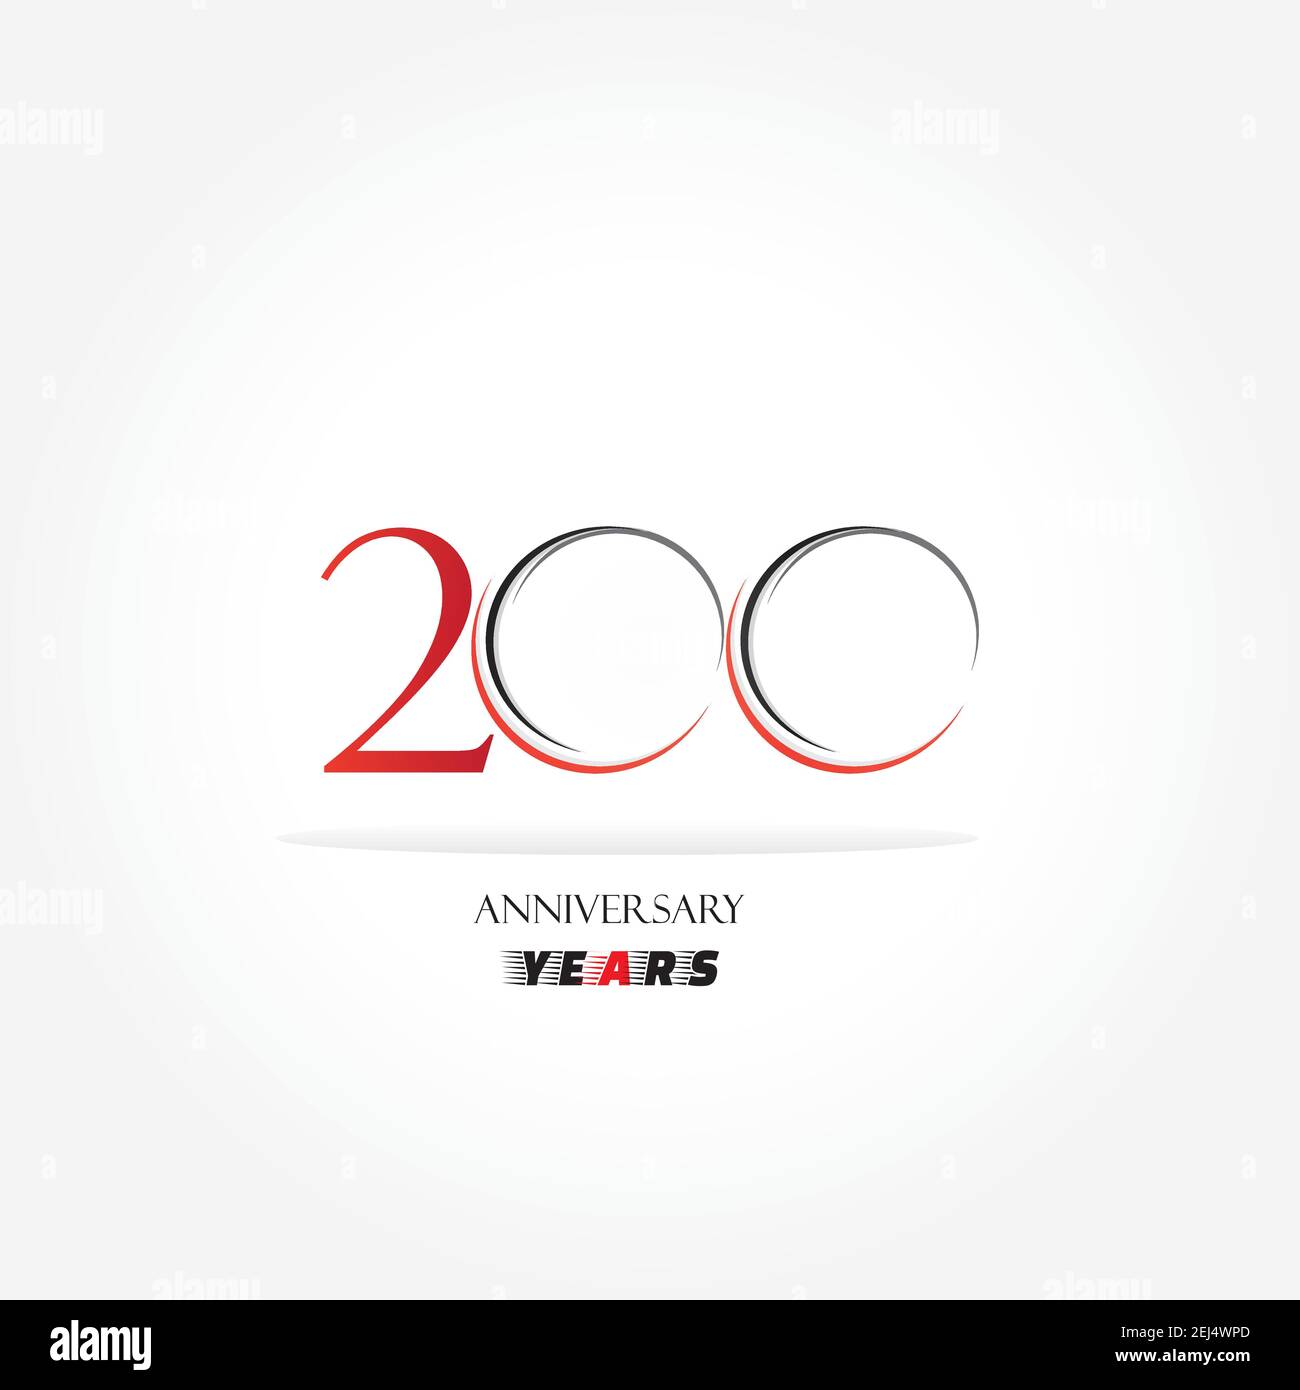 200 years anniversary linked logotype with red color isolated on white background for company celebration event Stock Vector